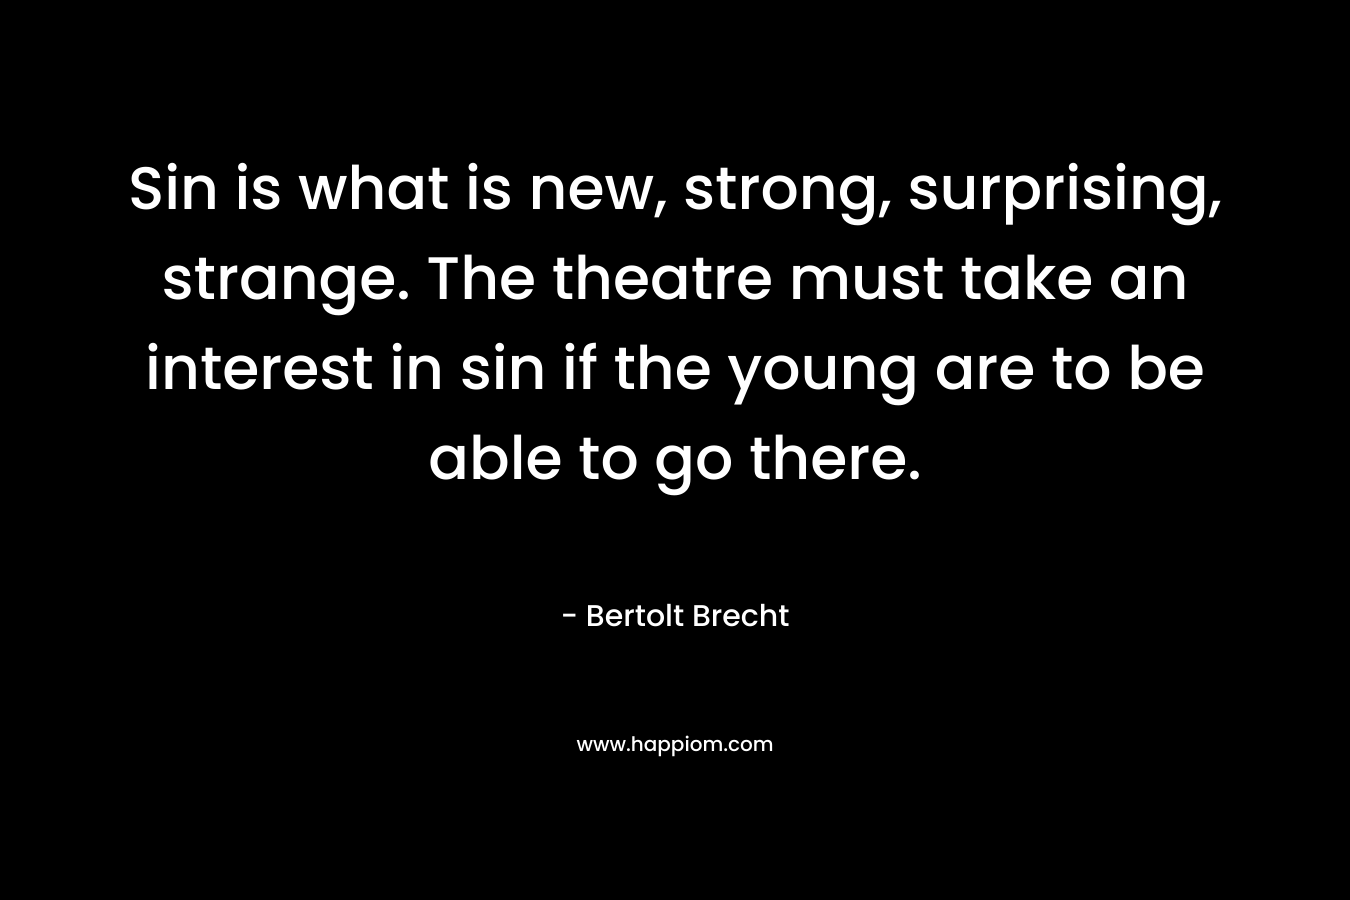 Sin is what is new, strong, surprising, strange. The theatre must take an interest in sin if the young are to be able to go there.